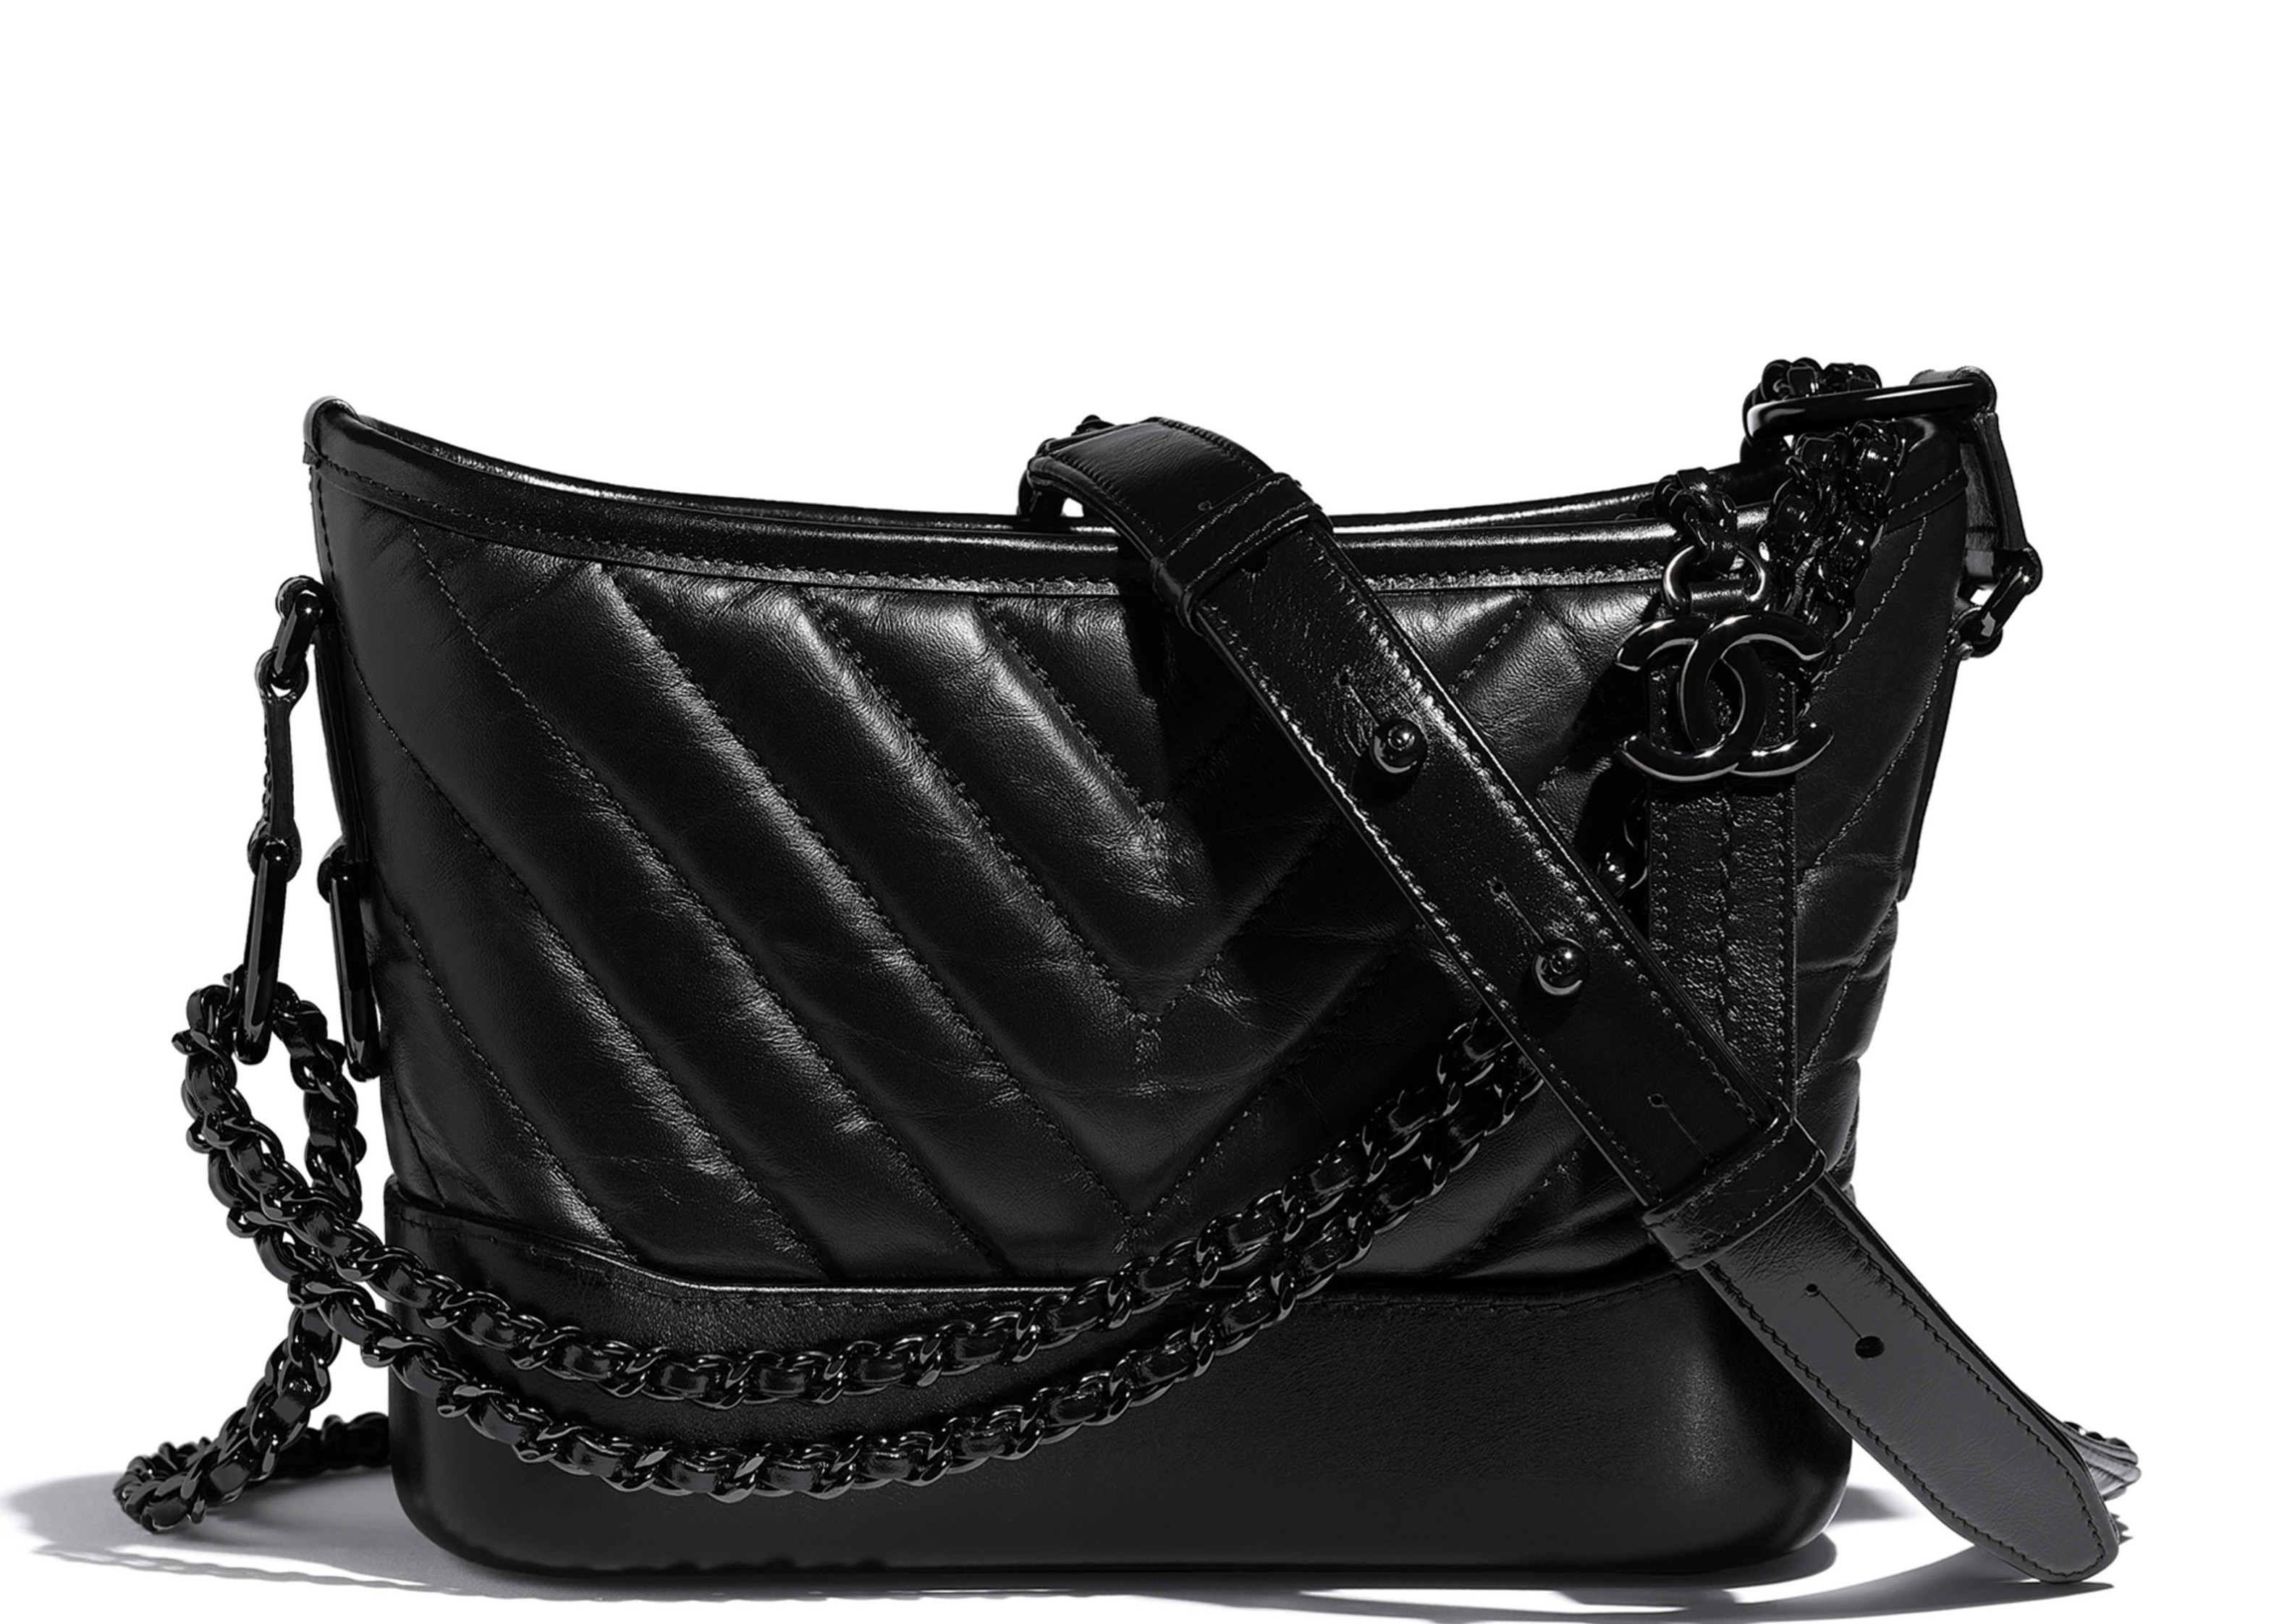 I FINALLY got the CHANEL 22 BAG in ALL BLACK what fits inside  modshots   close up  YouTube